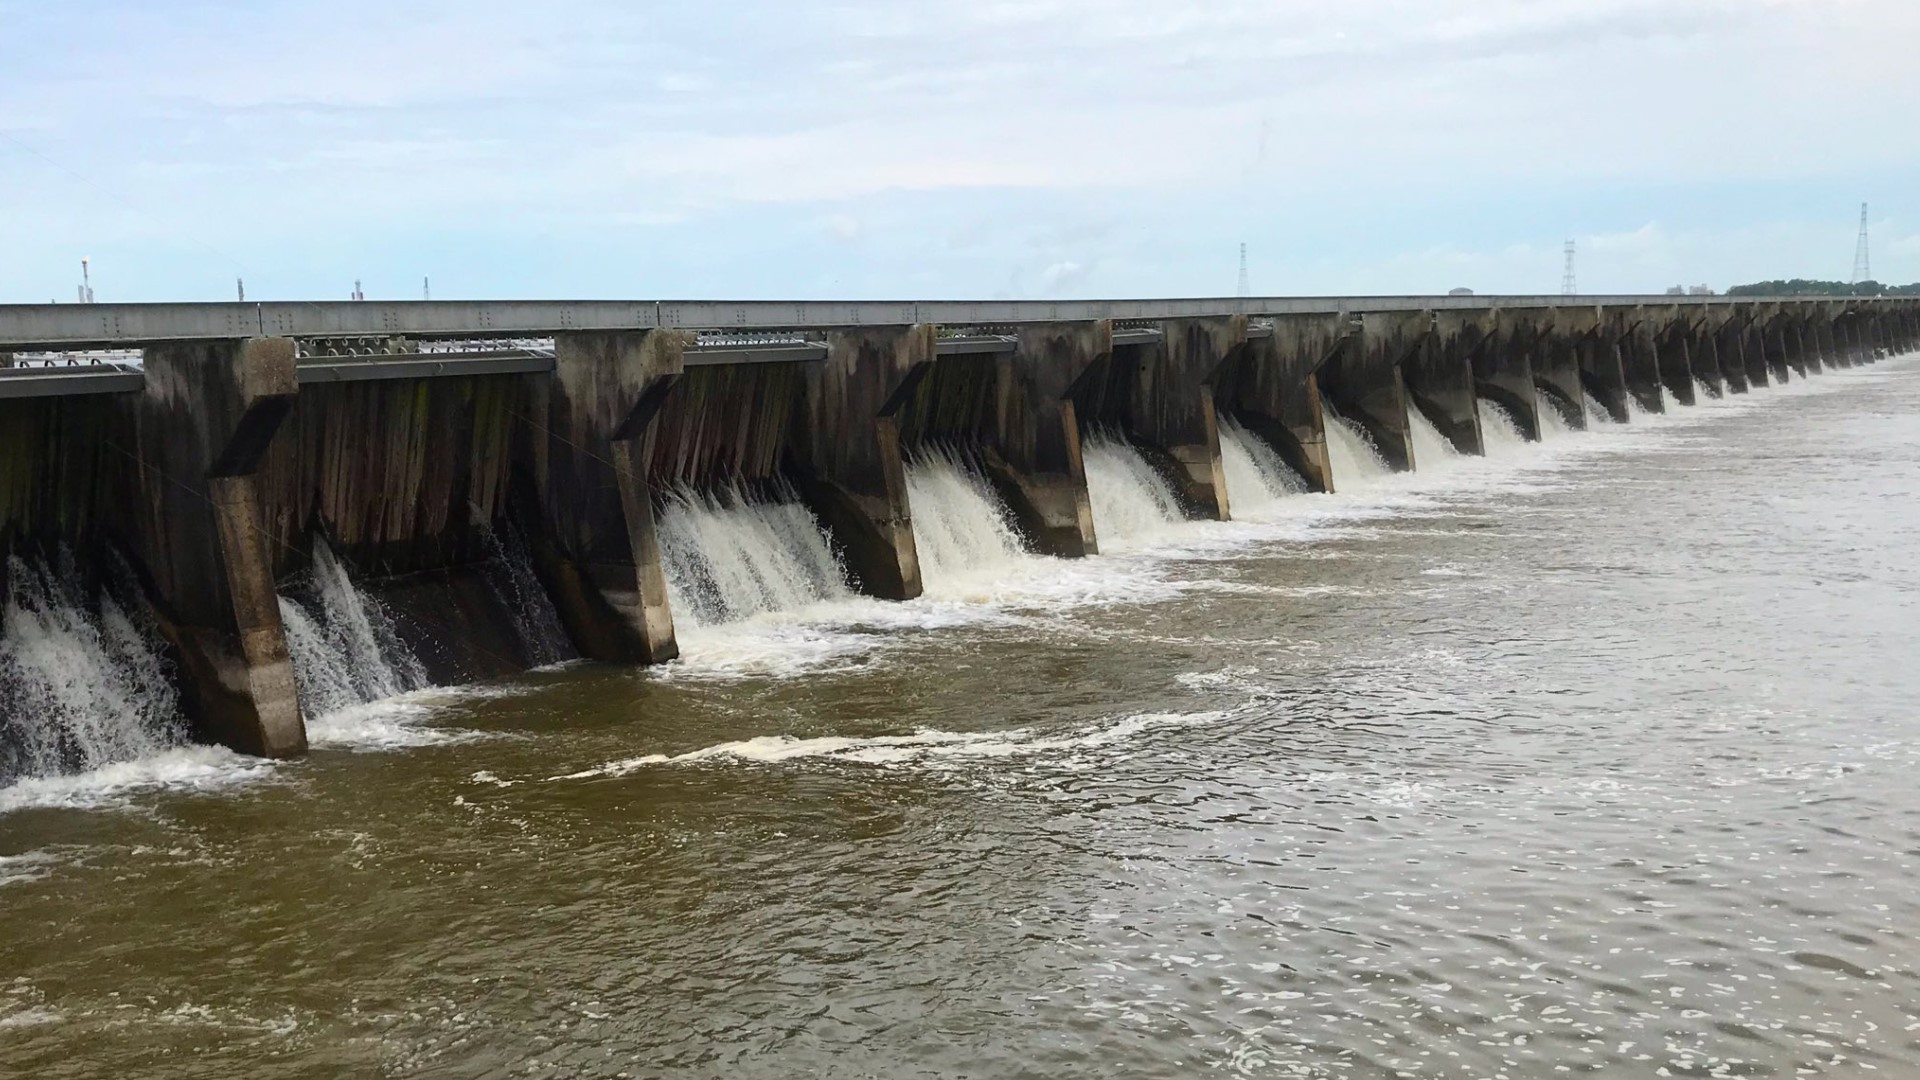 Based on the forecast from the National Weather Service, the spillway should be safe to close in mid-July